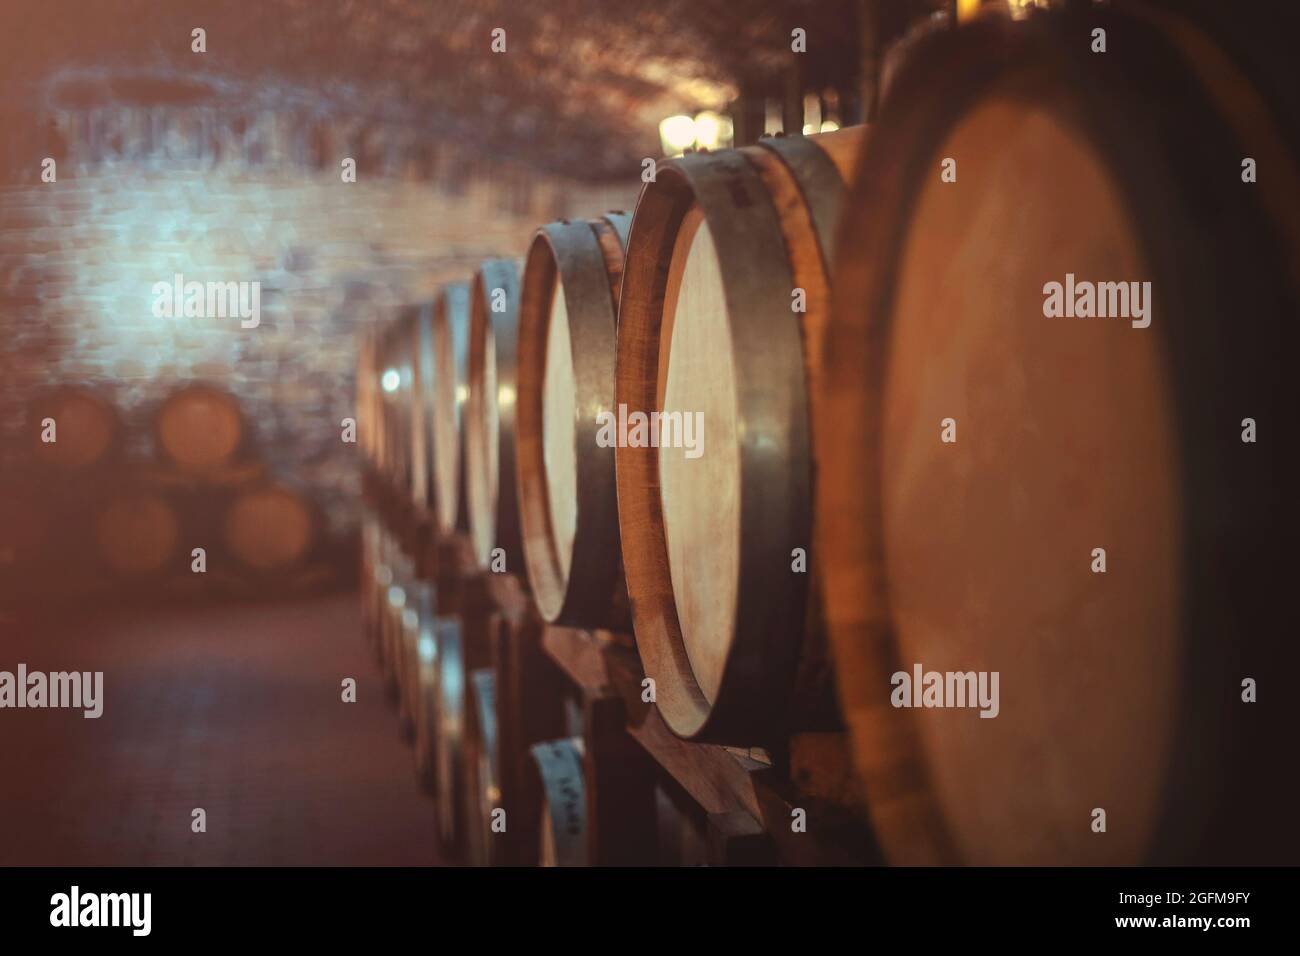 Old oak barrels in a wine cellar with copy space Stock Photo